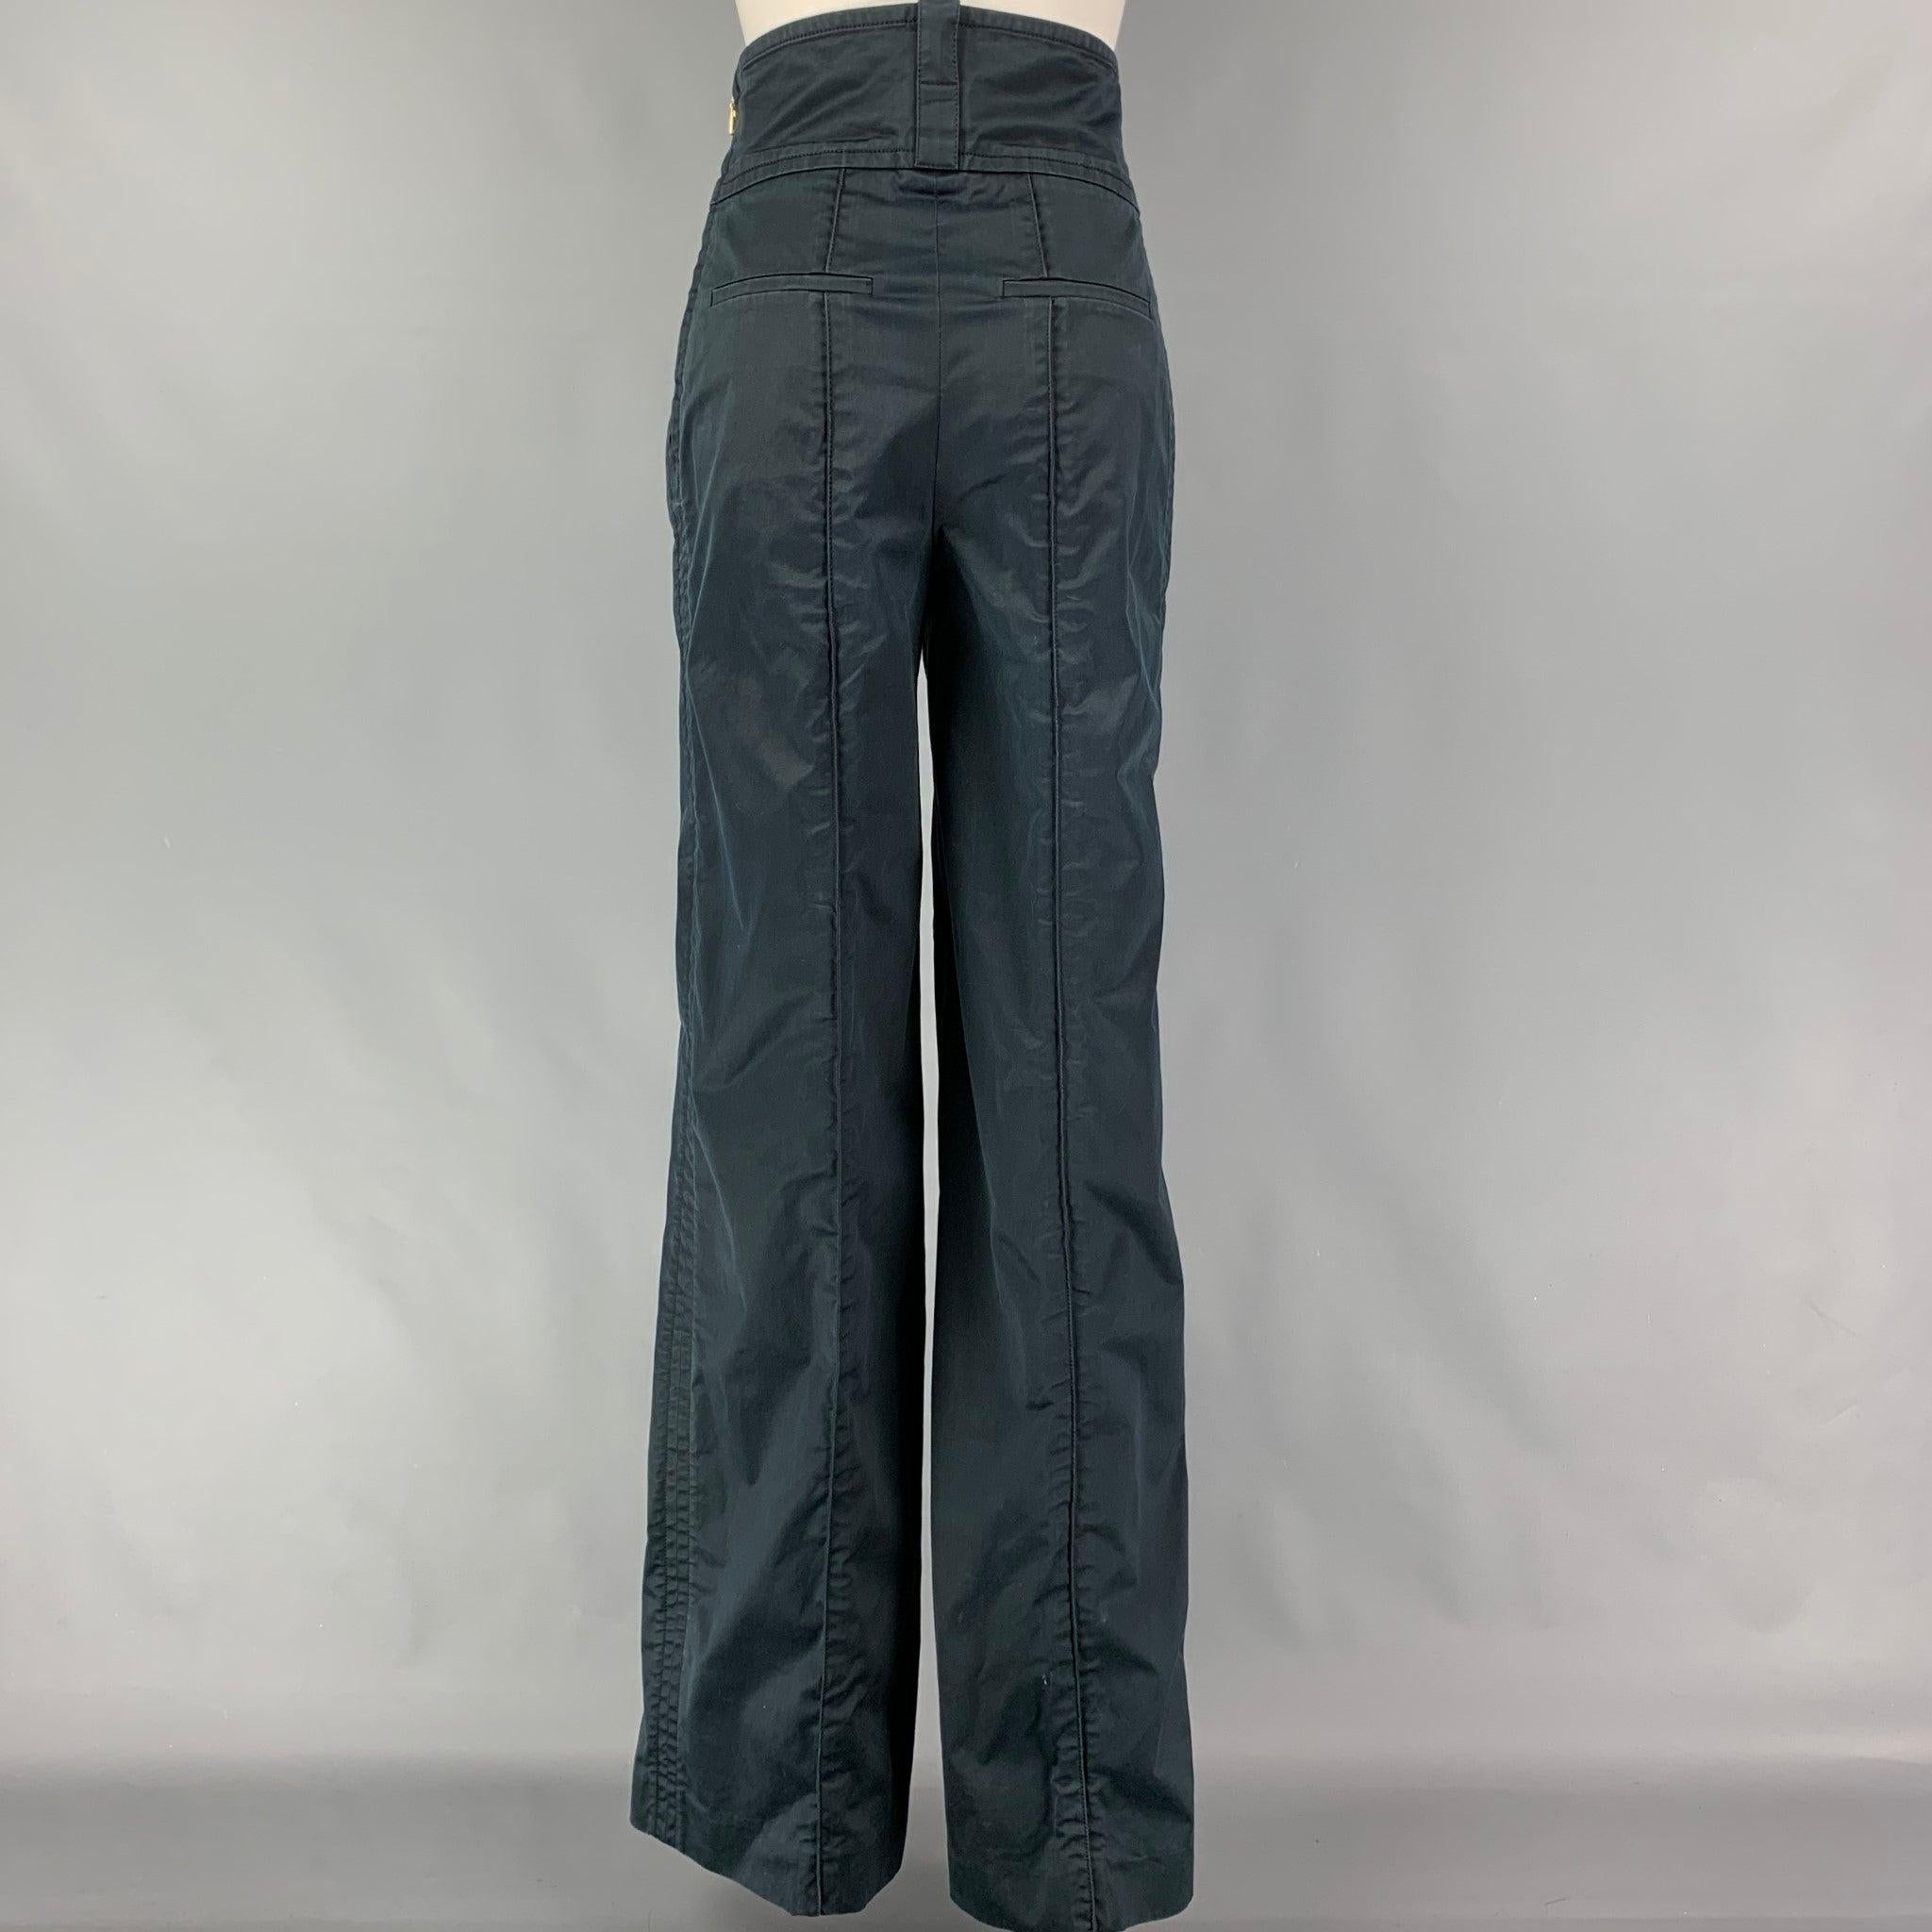 LOUIS VUITTON dress pants comes in a navy cotton featuring a high waist, wide leg, slit pockets, and a sie zipper closure. Made in Italy.
Very Good
Pre-Owned Condition. 

Marked:   38 

Measurements: 
  Waist: 28 inches  Rise: 14 inches  Inseam: 36